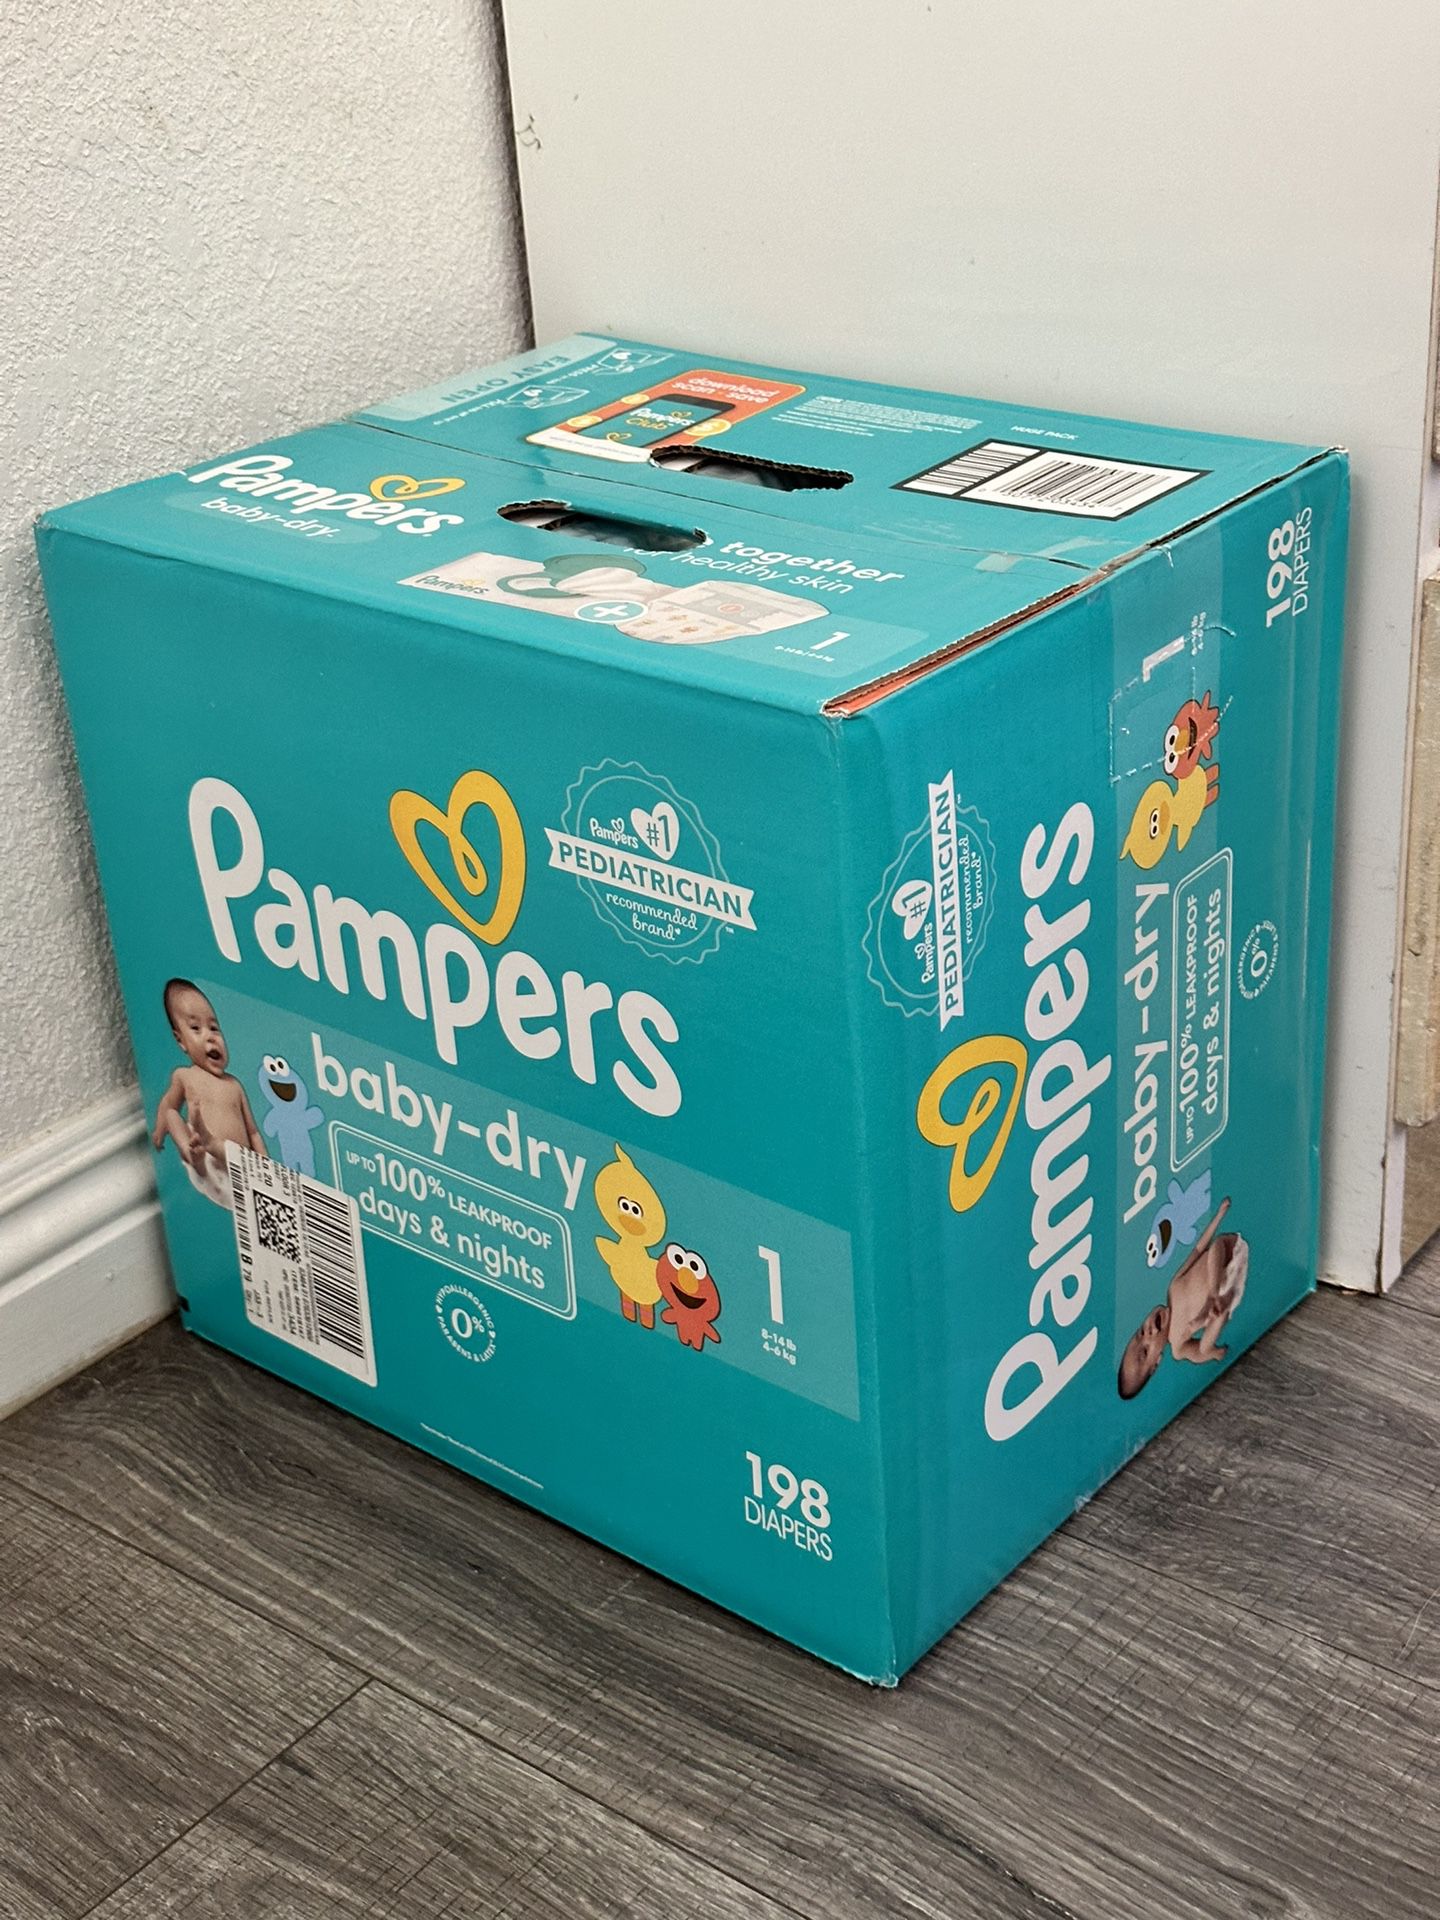 Pampers Baby Dry Size 1